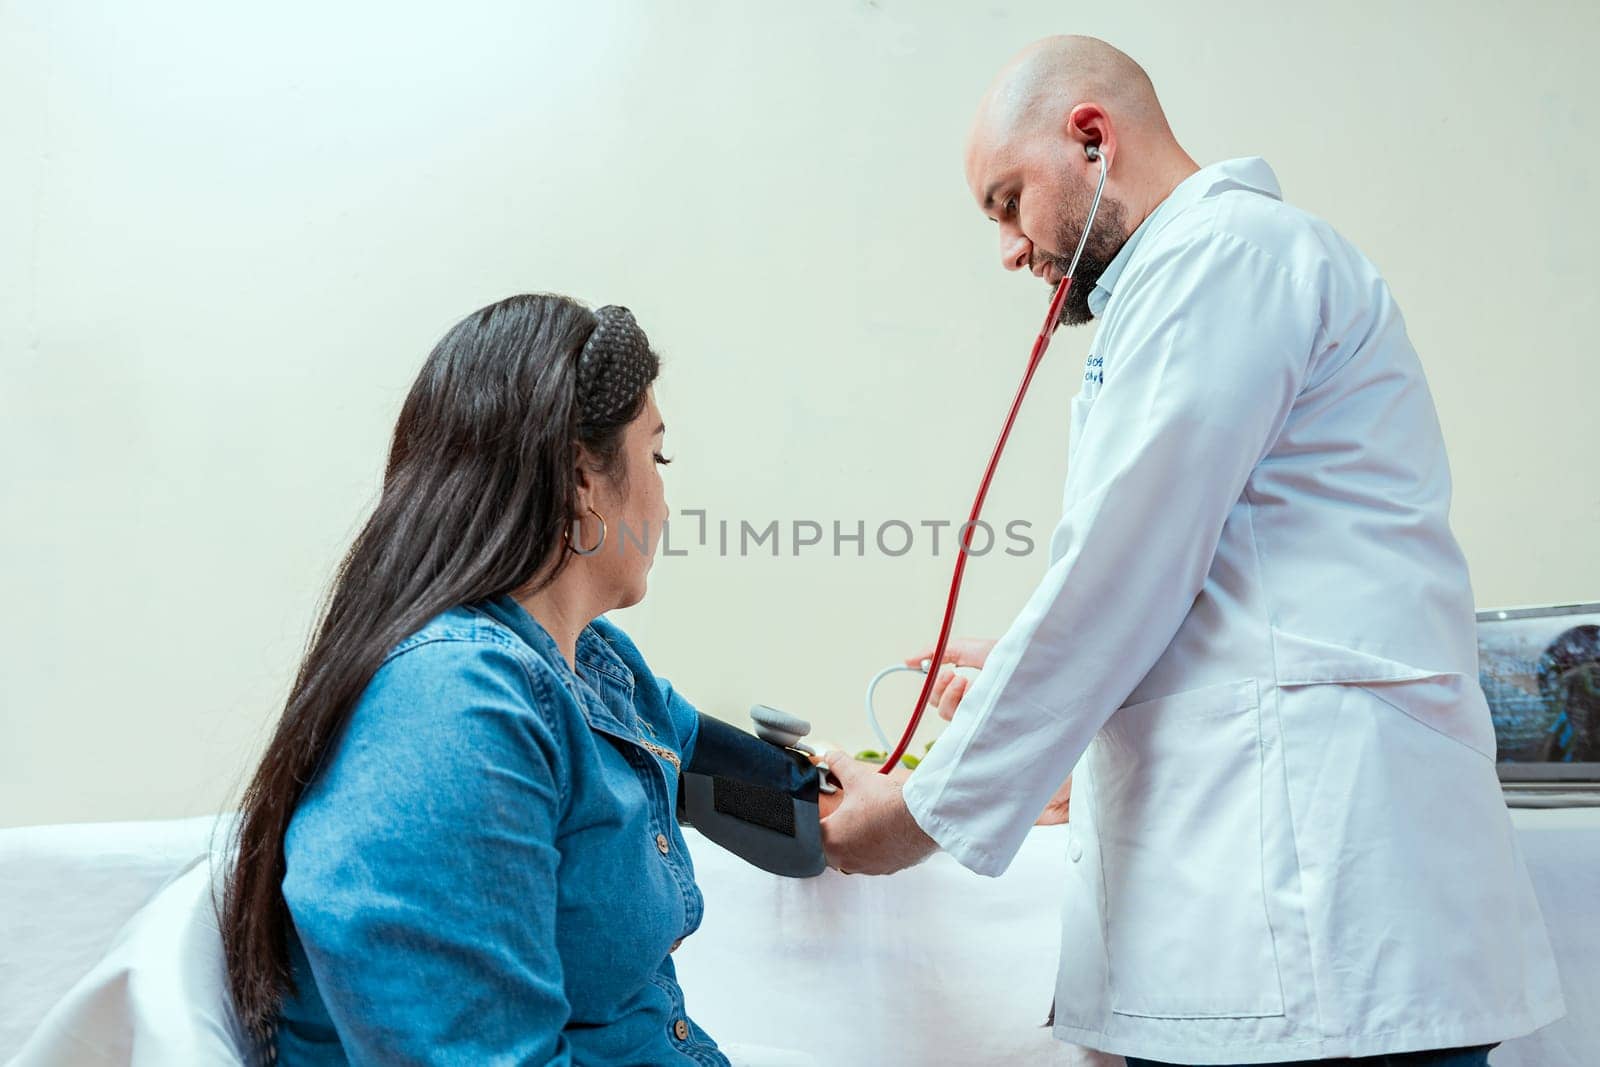 Measuring blood pressure to patient in the office, Nutritionist man measuring blood pressure to female patient in office, Nutritionist measuring blood pressure to patient by isaiphoto